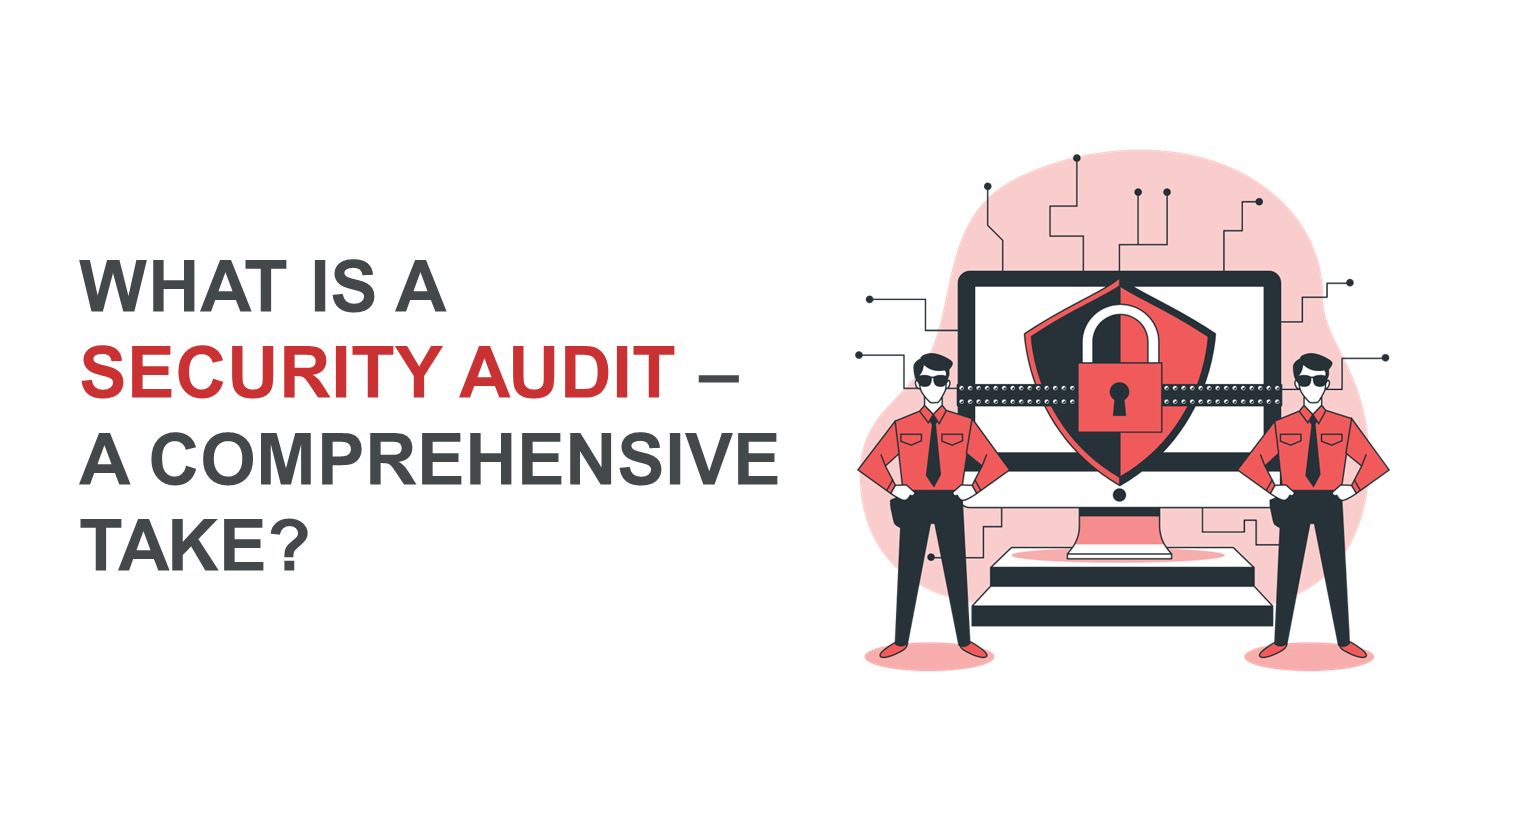 What Is a Security Audit – A Comprehensive Take